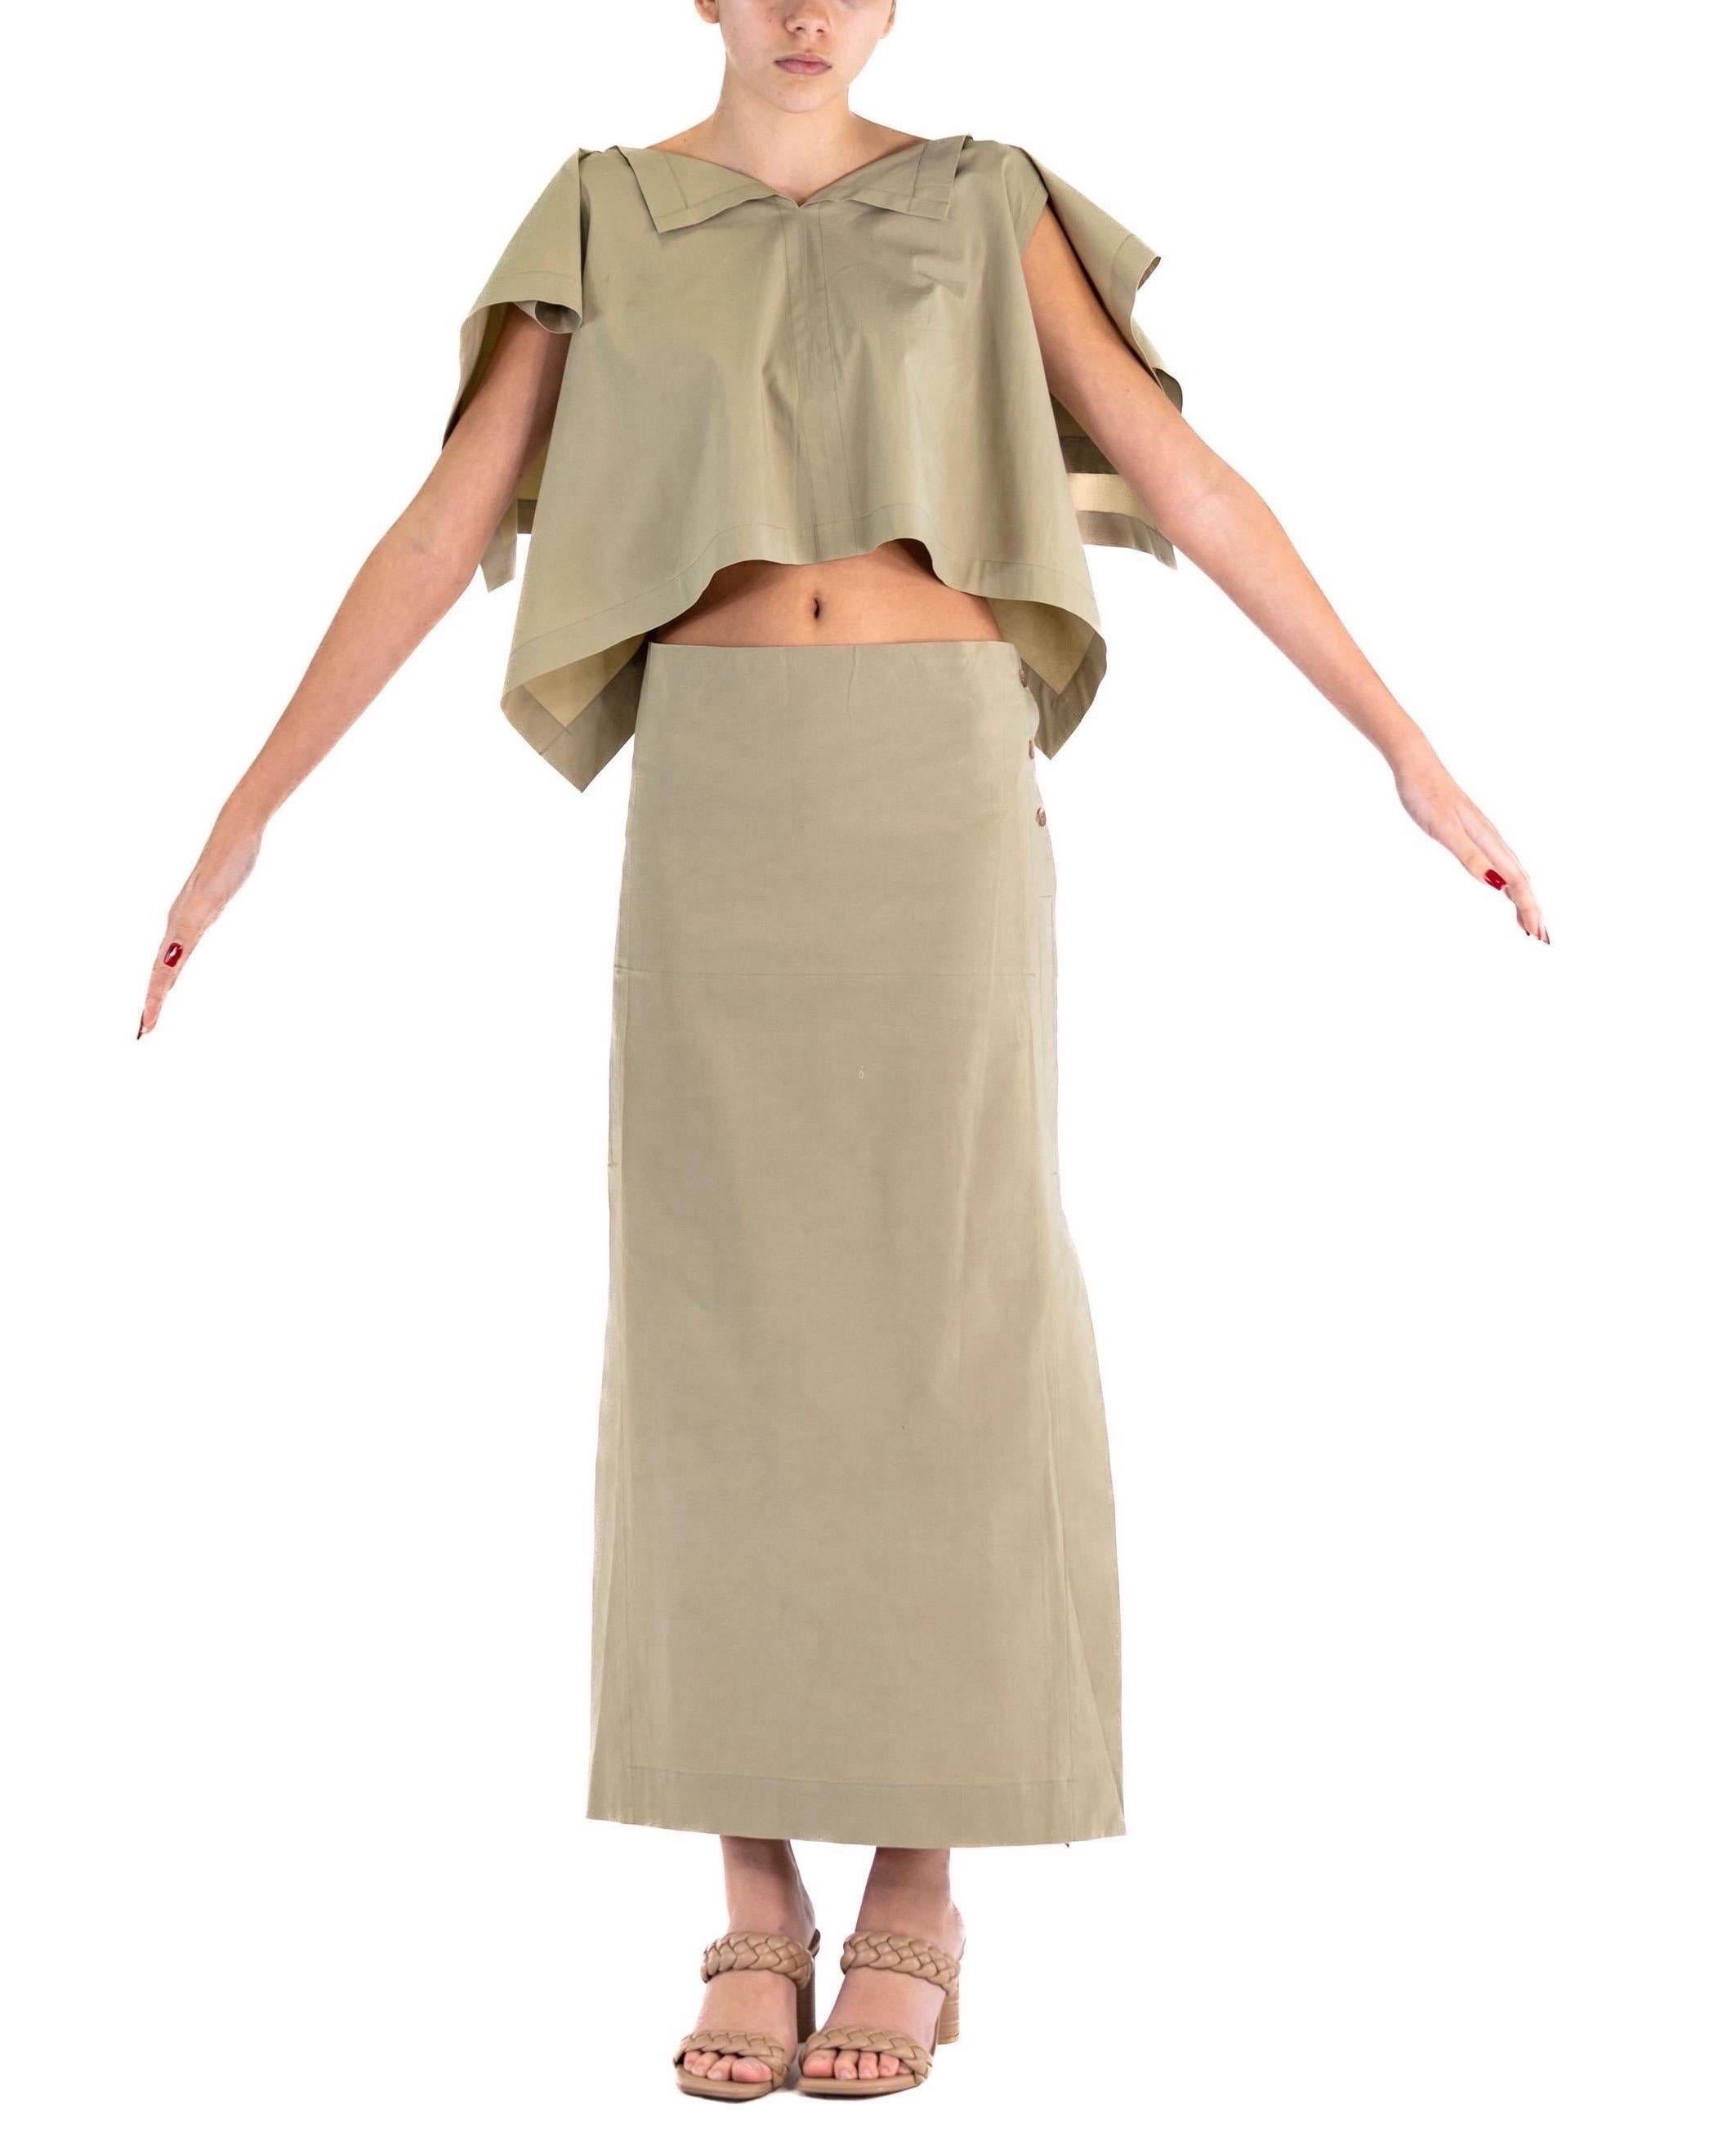 1990S ISSEY MIYAKE Beige Cotton Top And Skirt Ensemble For Sale 1